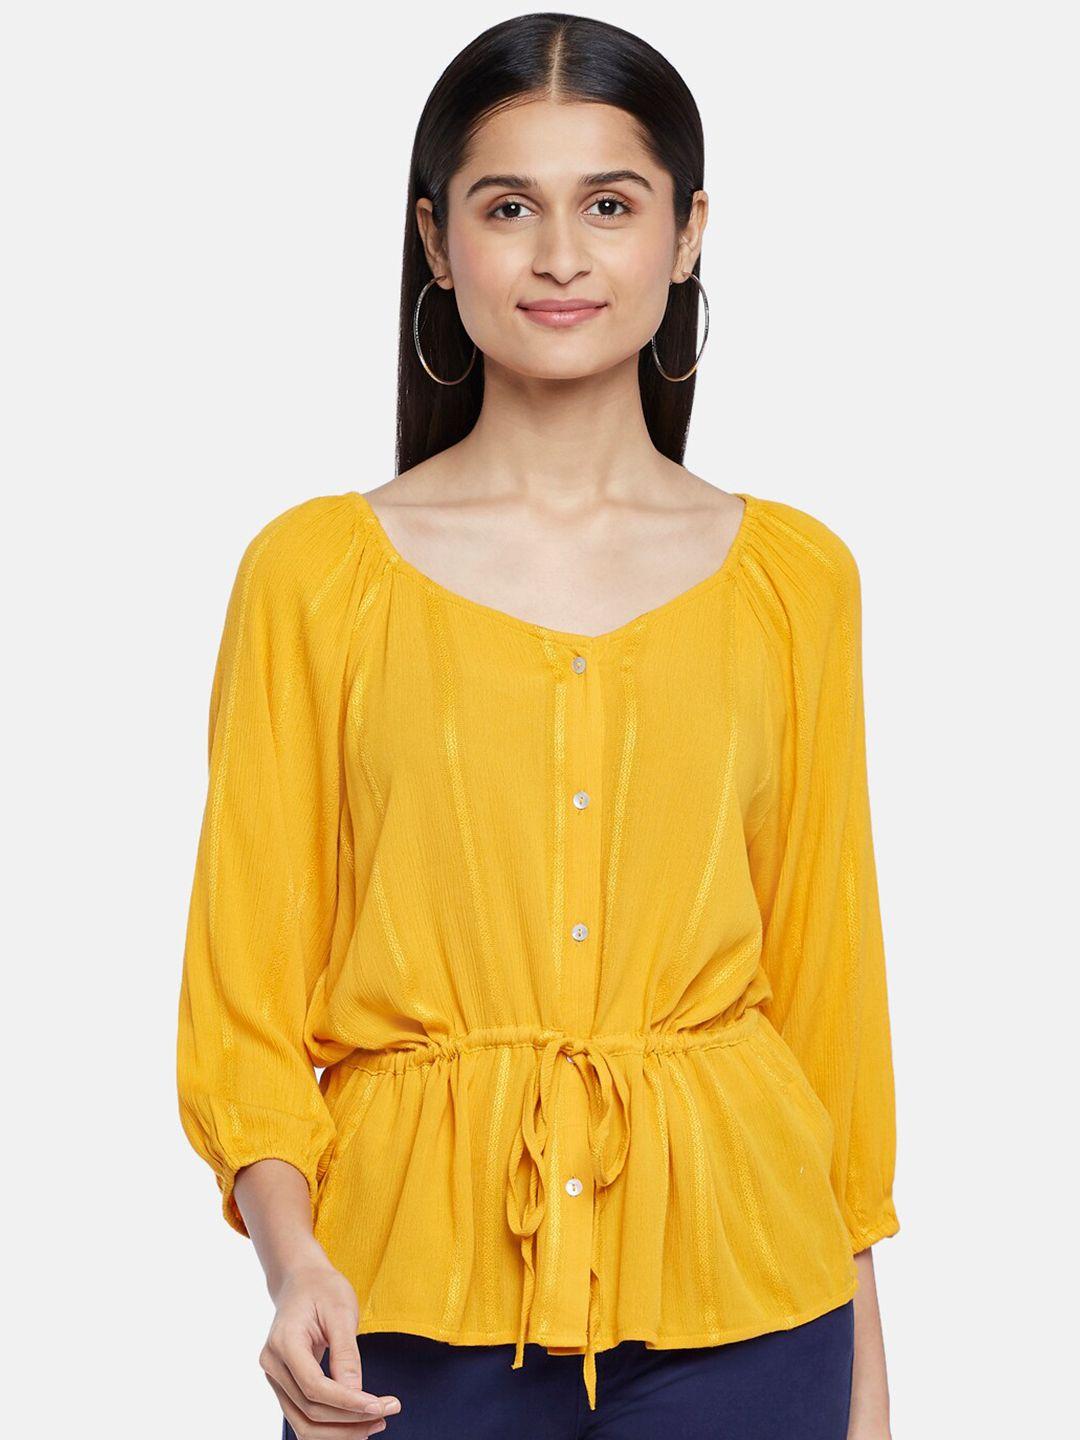 honey by pantaloons women mustard yellow cinched waist top